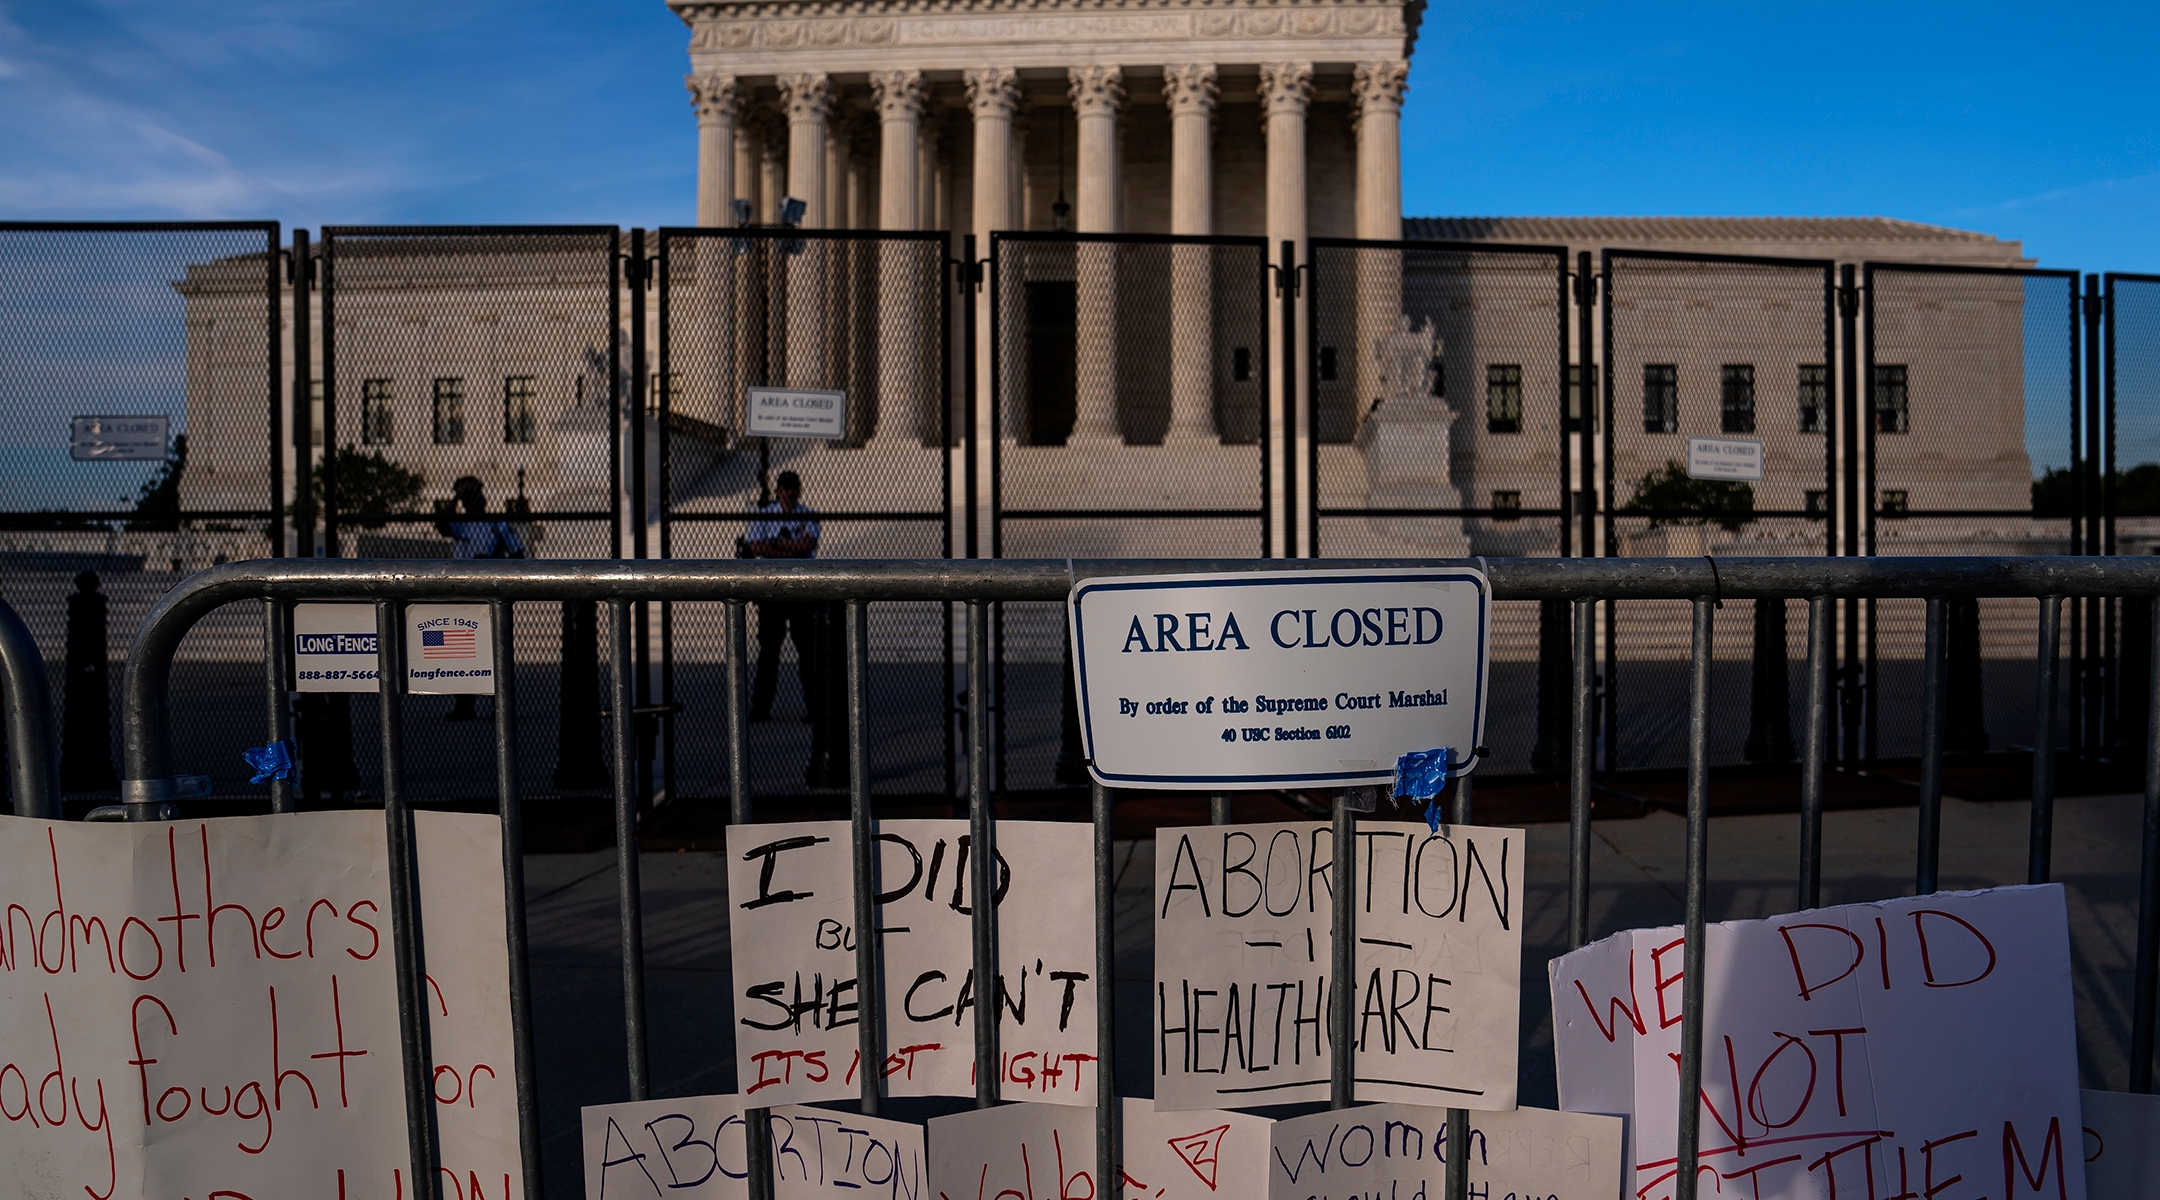 Signs left by abortion rights supporters line the security fence surrounding the Supreme Court in Washington, D.C., June 28, 2022. (Nathan Howard/Getty Images)